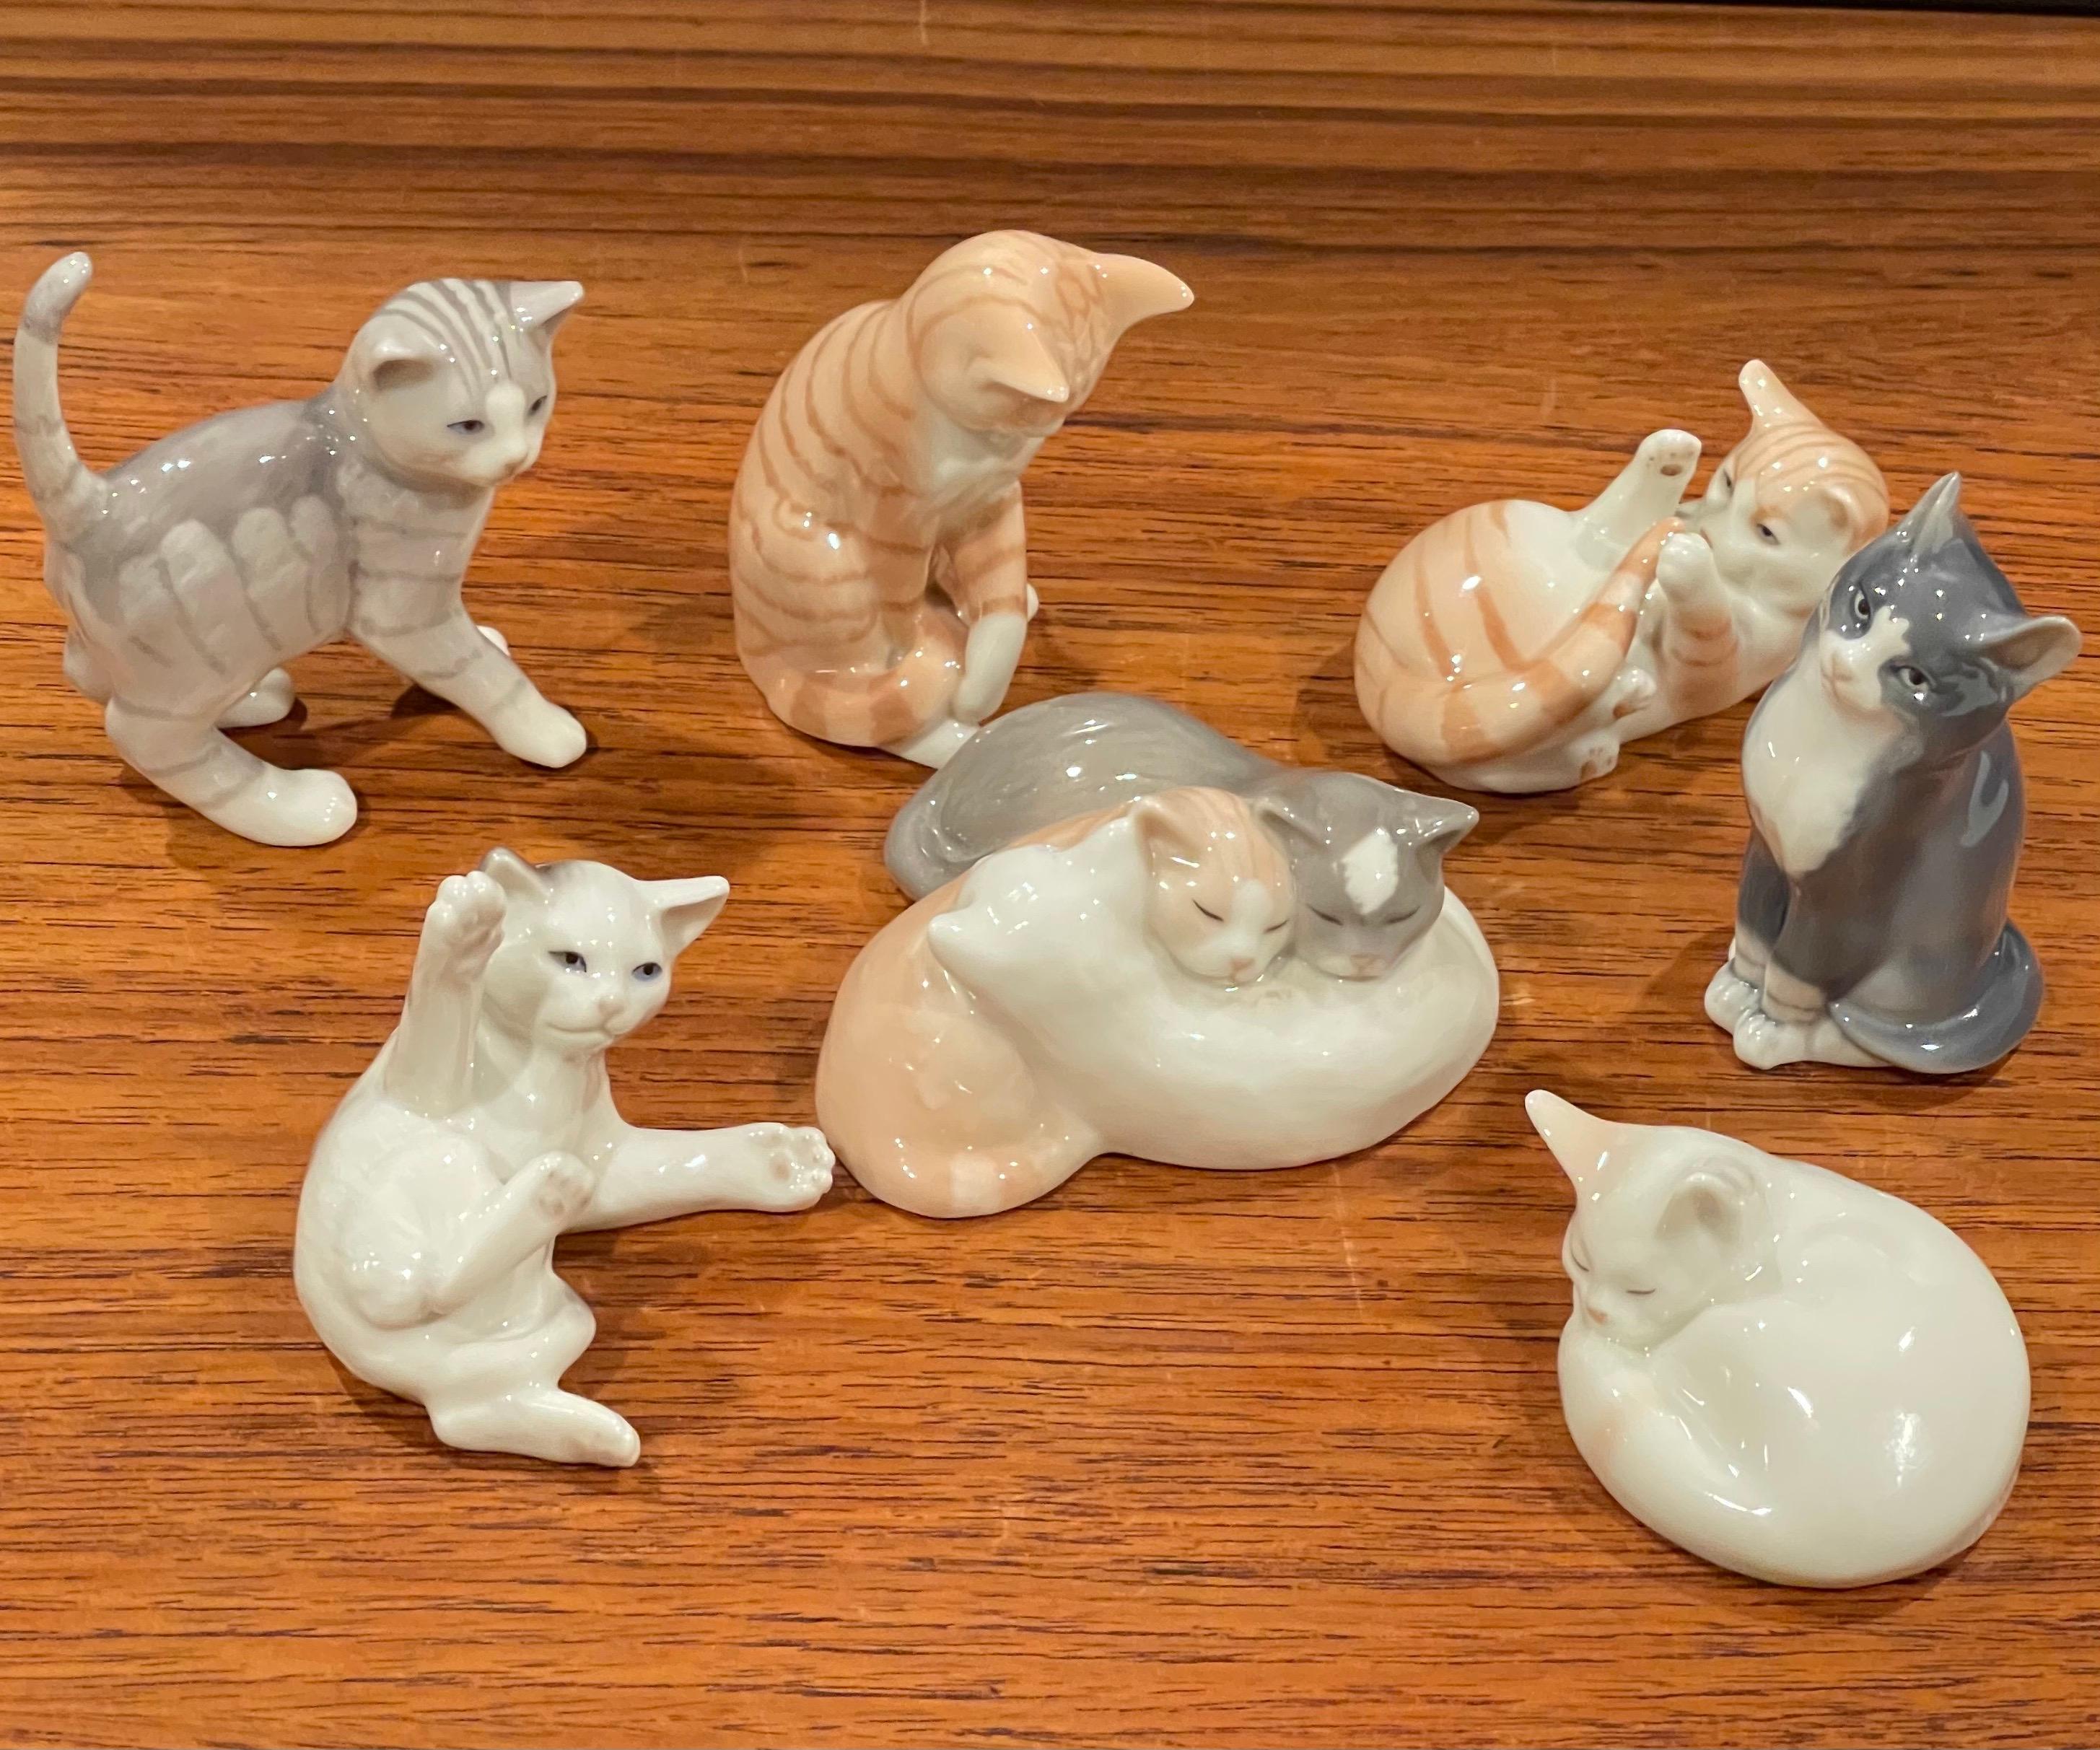 Collection of seven miniature porcelain cat sculptures by Royal Copenhagen, circa 1970s. The cats are in very good vintage condition with no chips or cracks and measure approximately 3